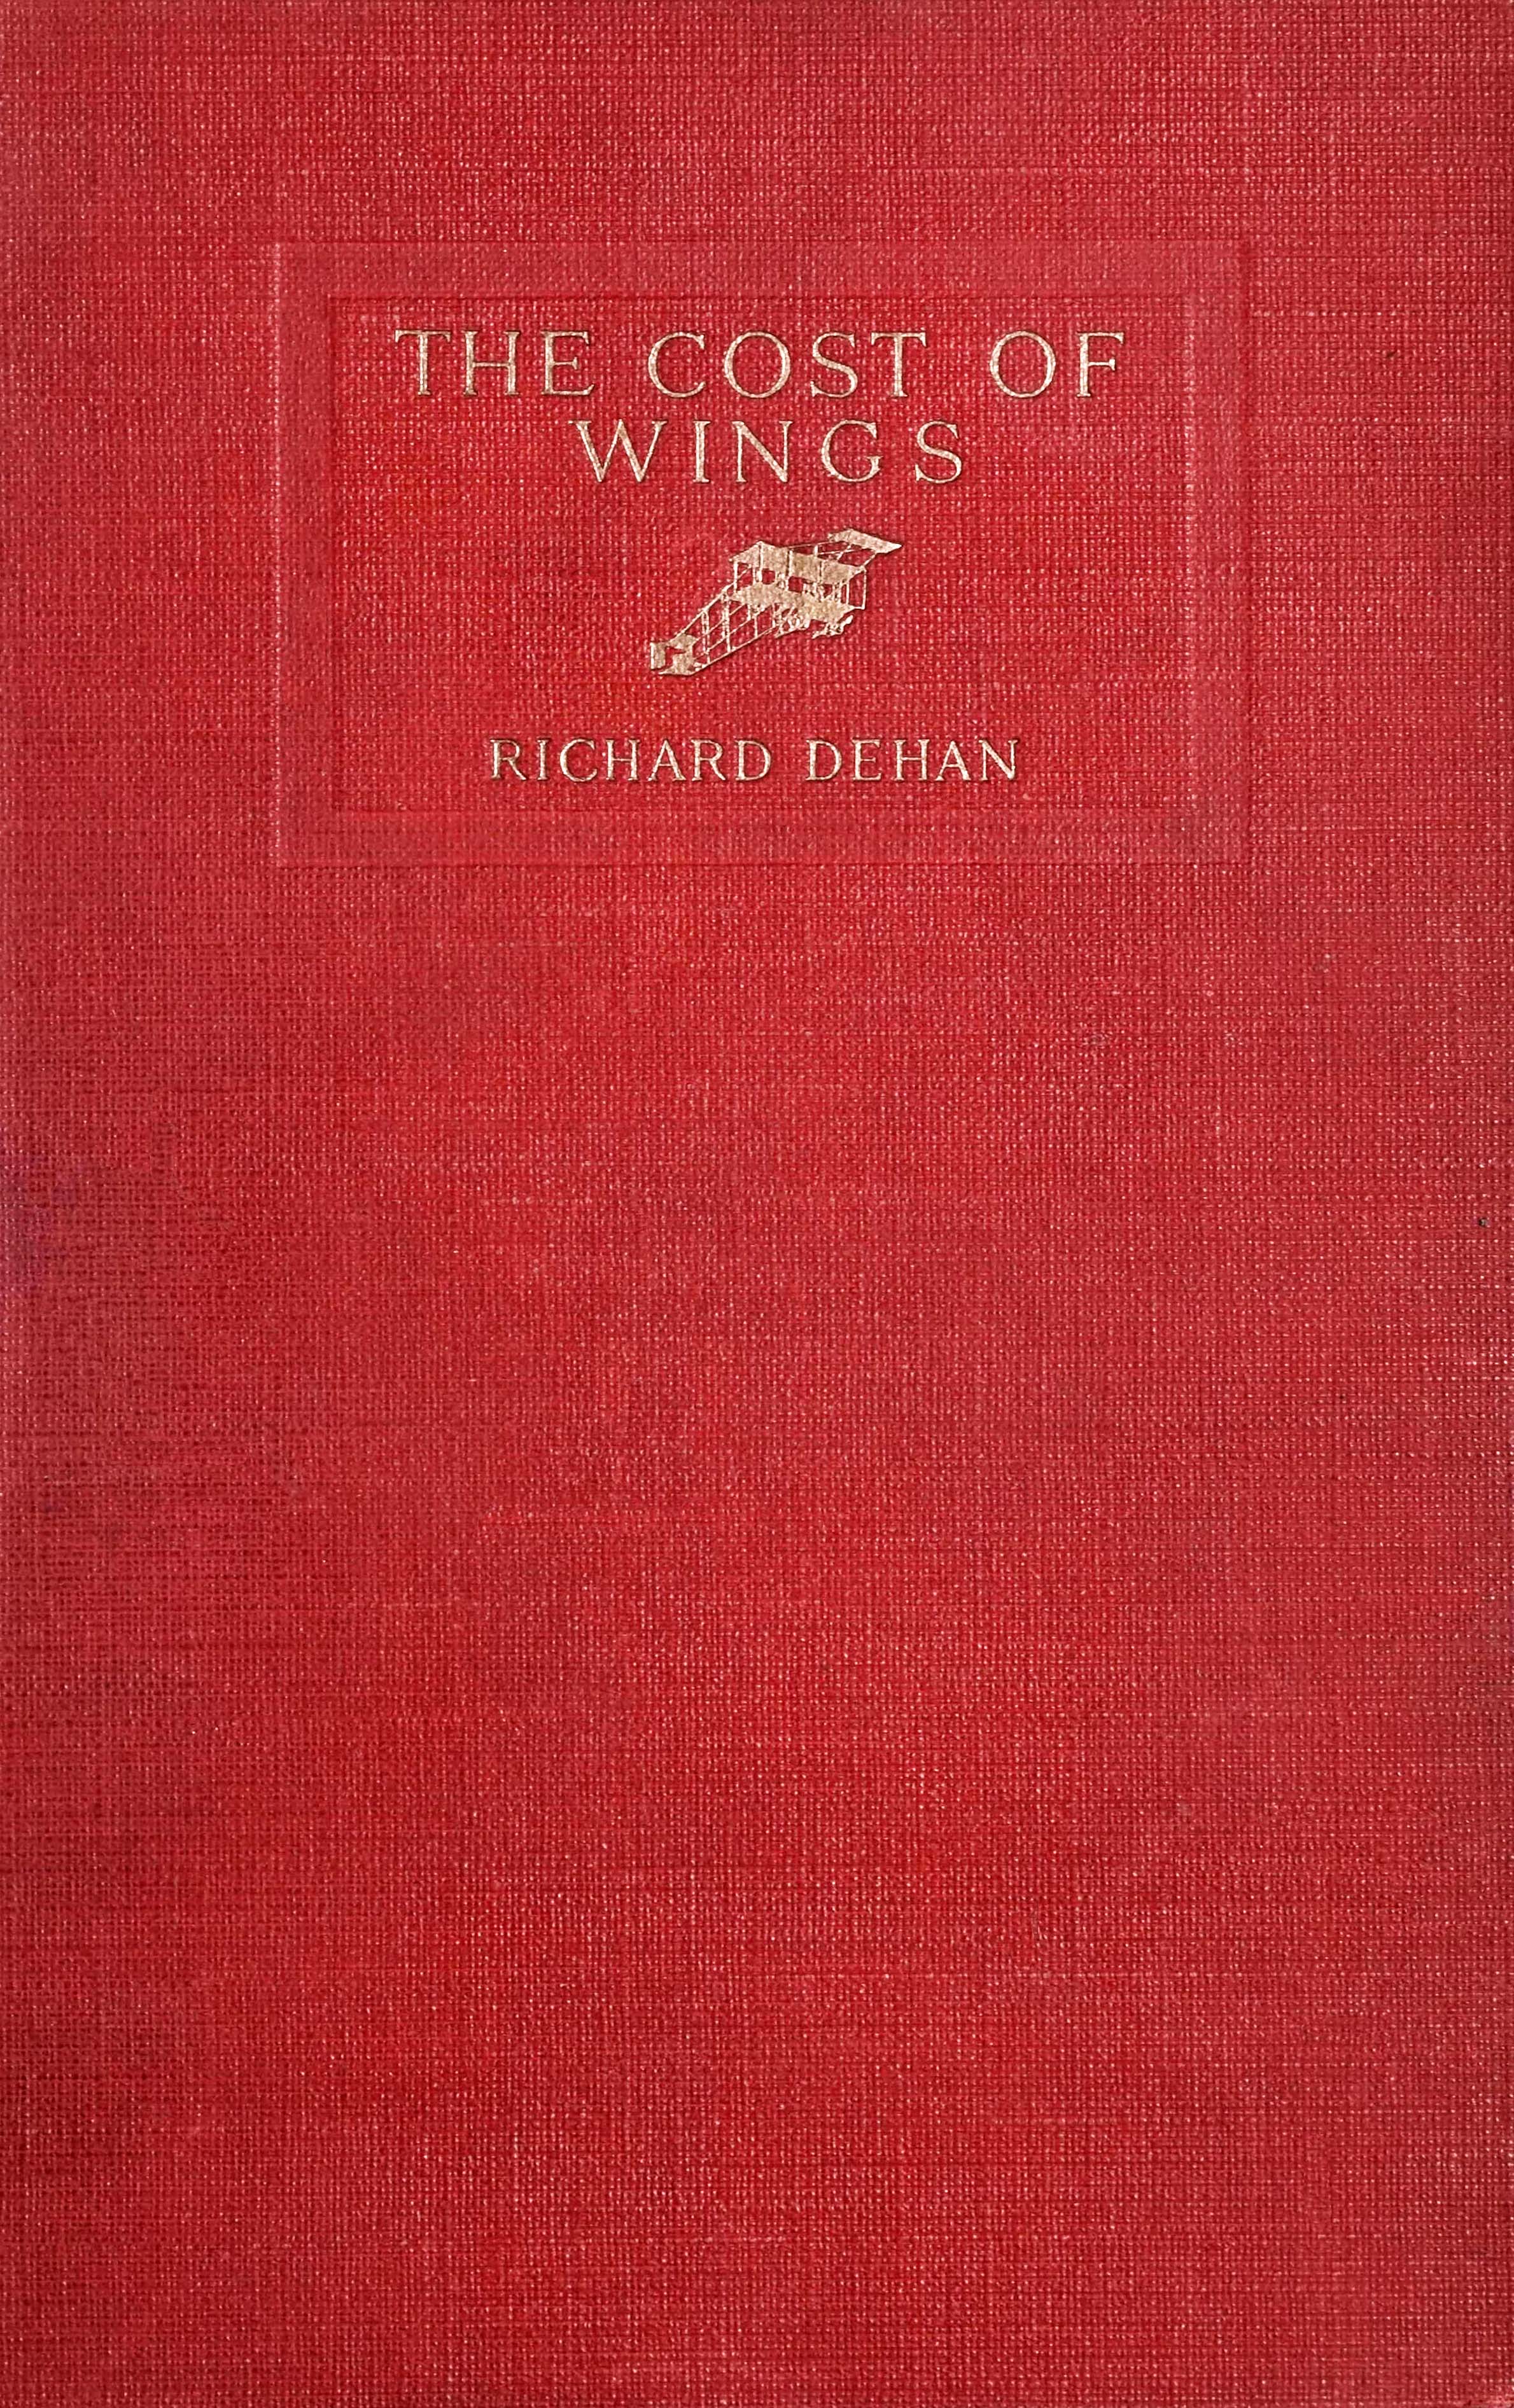 The cost of wings and other stories, by Richard Dehan—A Project Gutenberg eBook